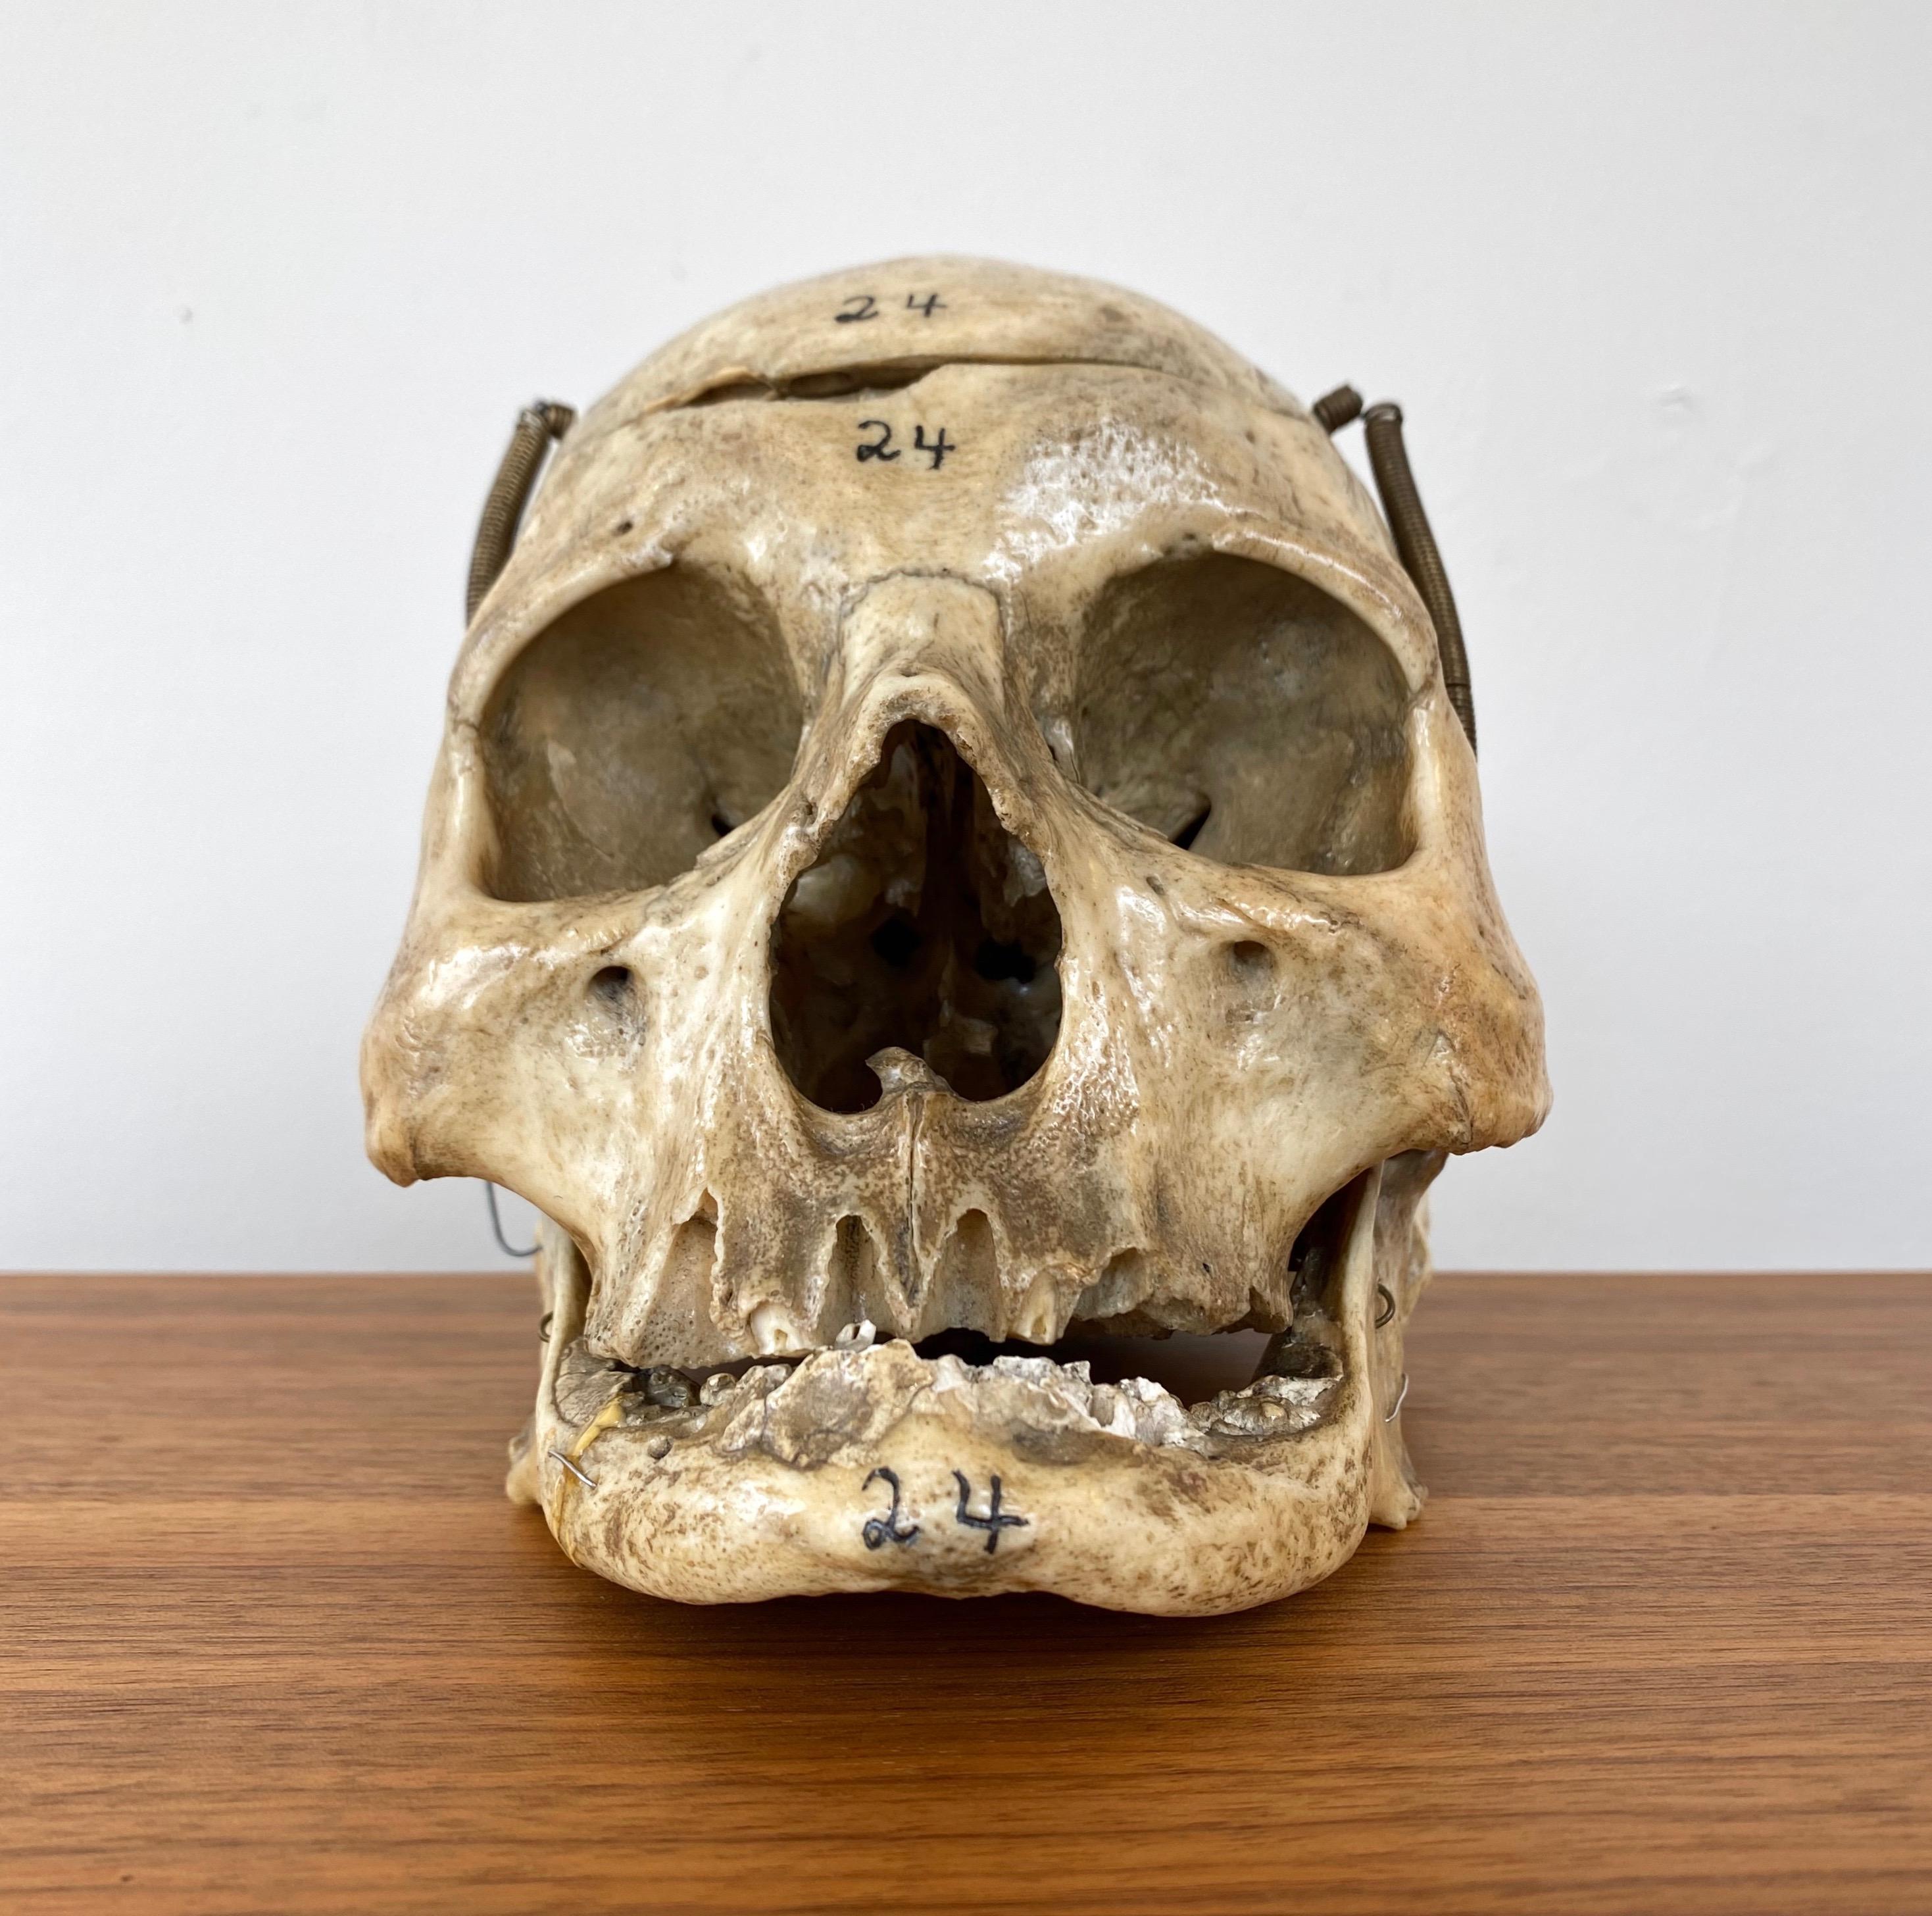 A very handsome antique articulated human skull that served as a medical teaching specimen beginning in about 1920.

Full of character, it features a cut calvarium secured to the mandible via pins and long springs, allowing for articulation of the